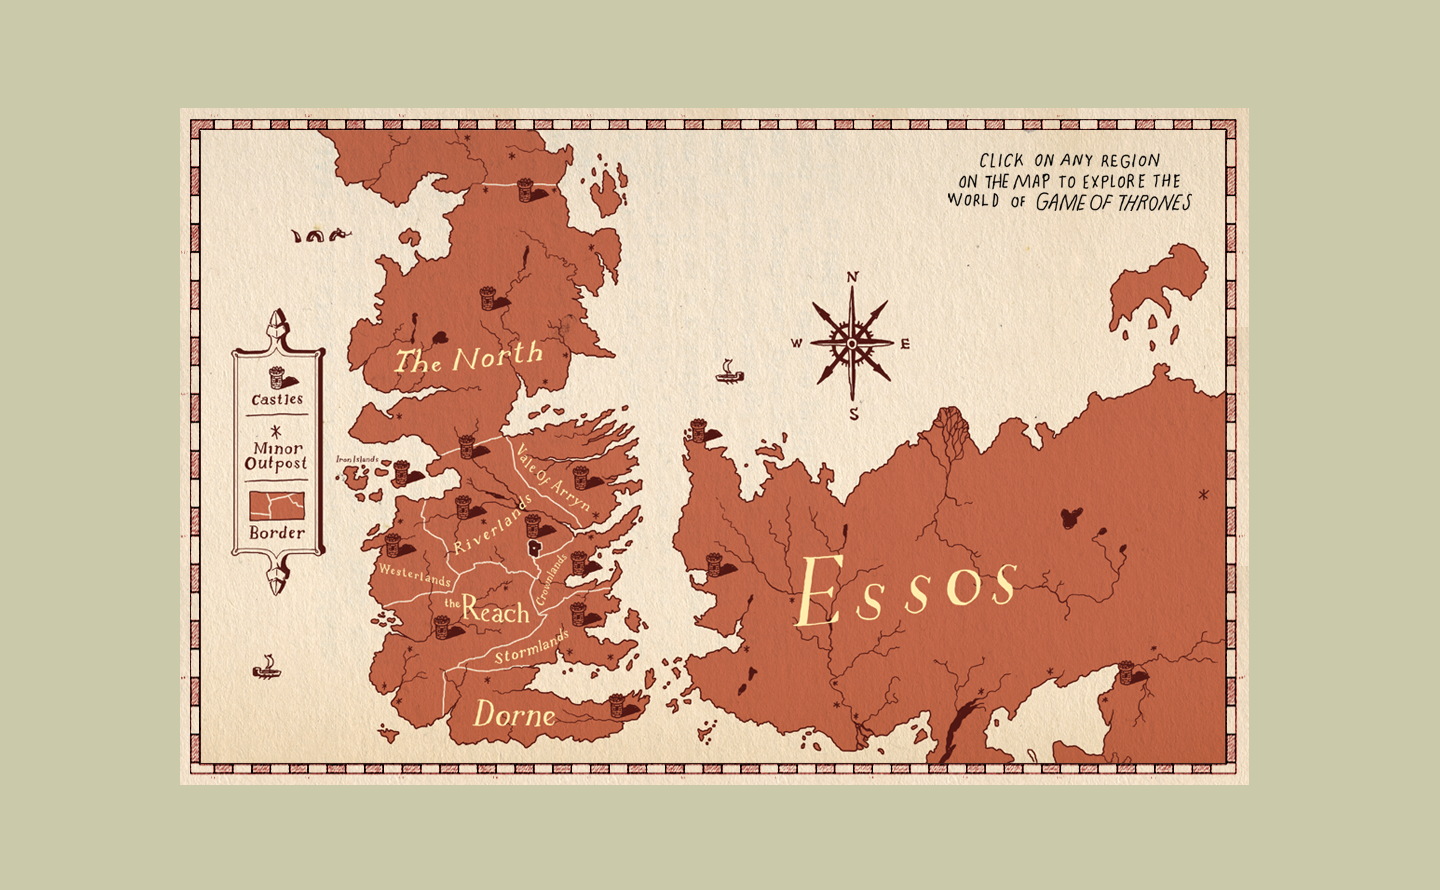 westeros map houses